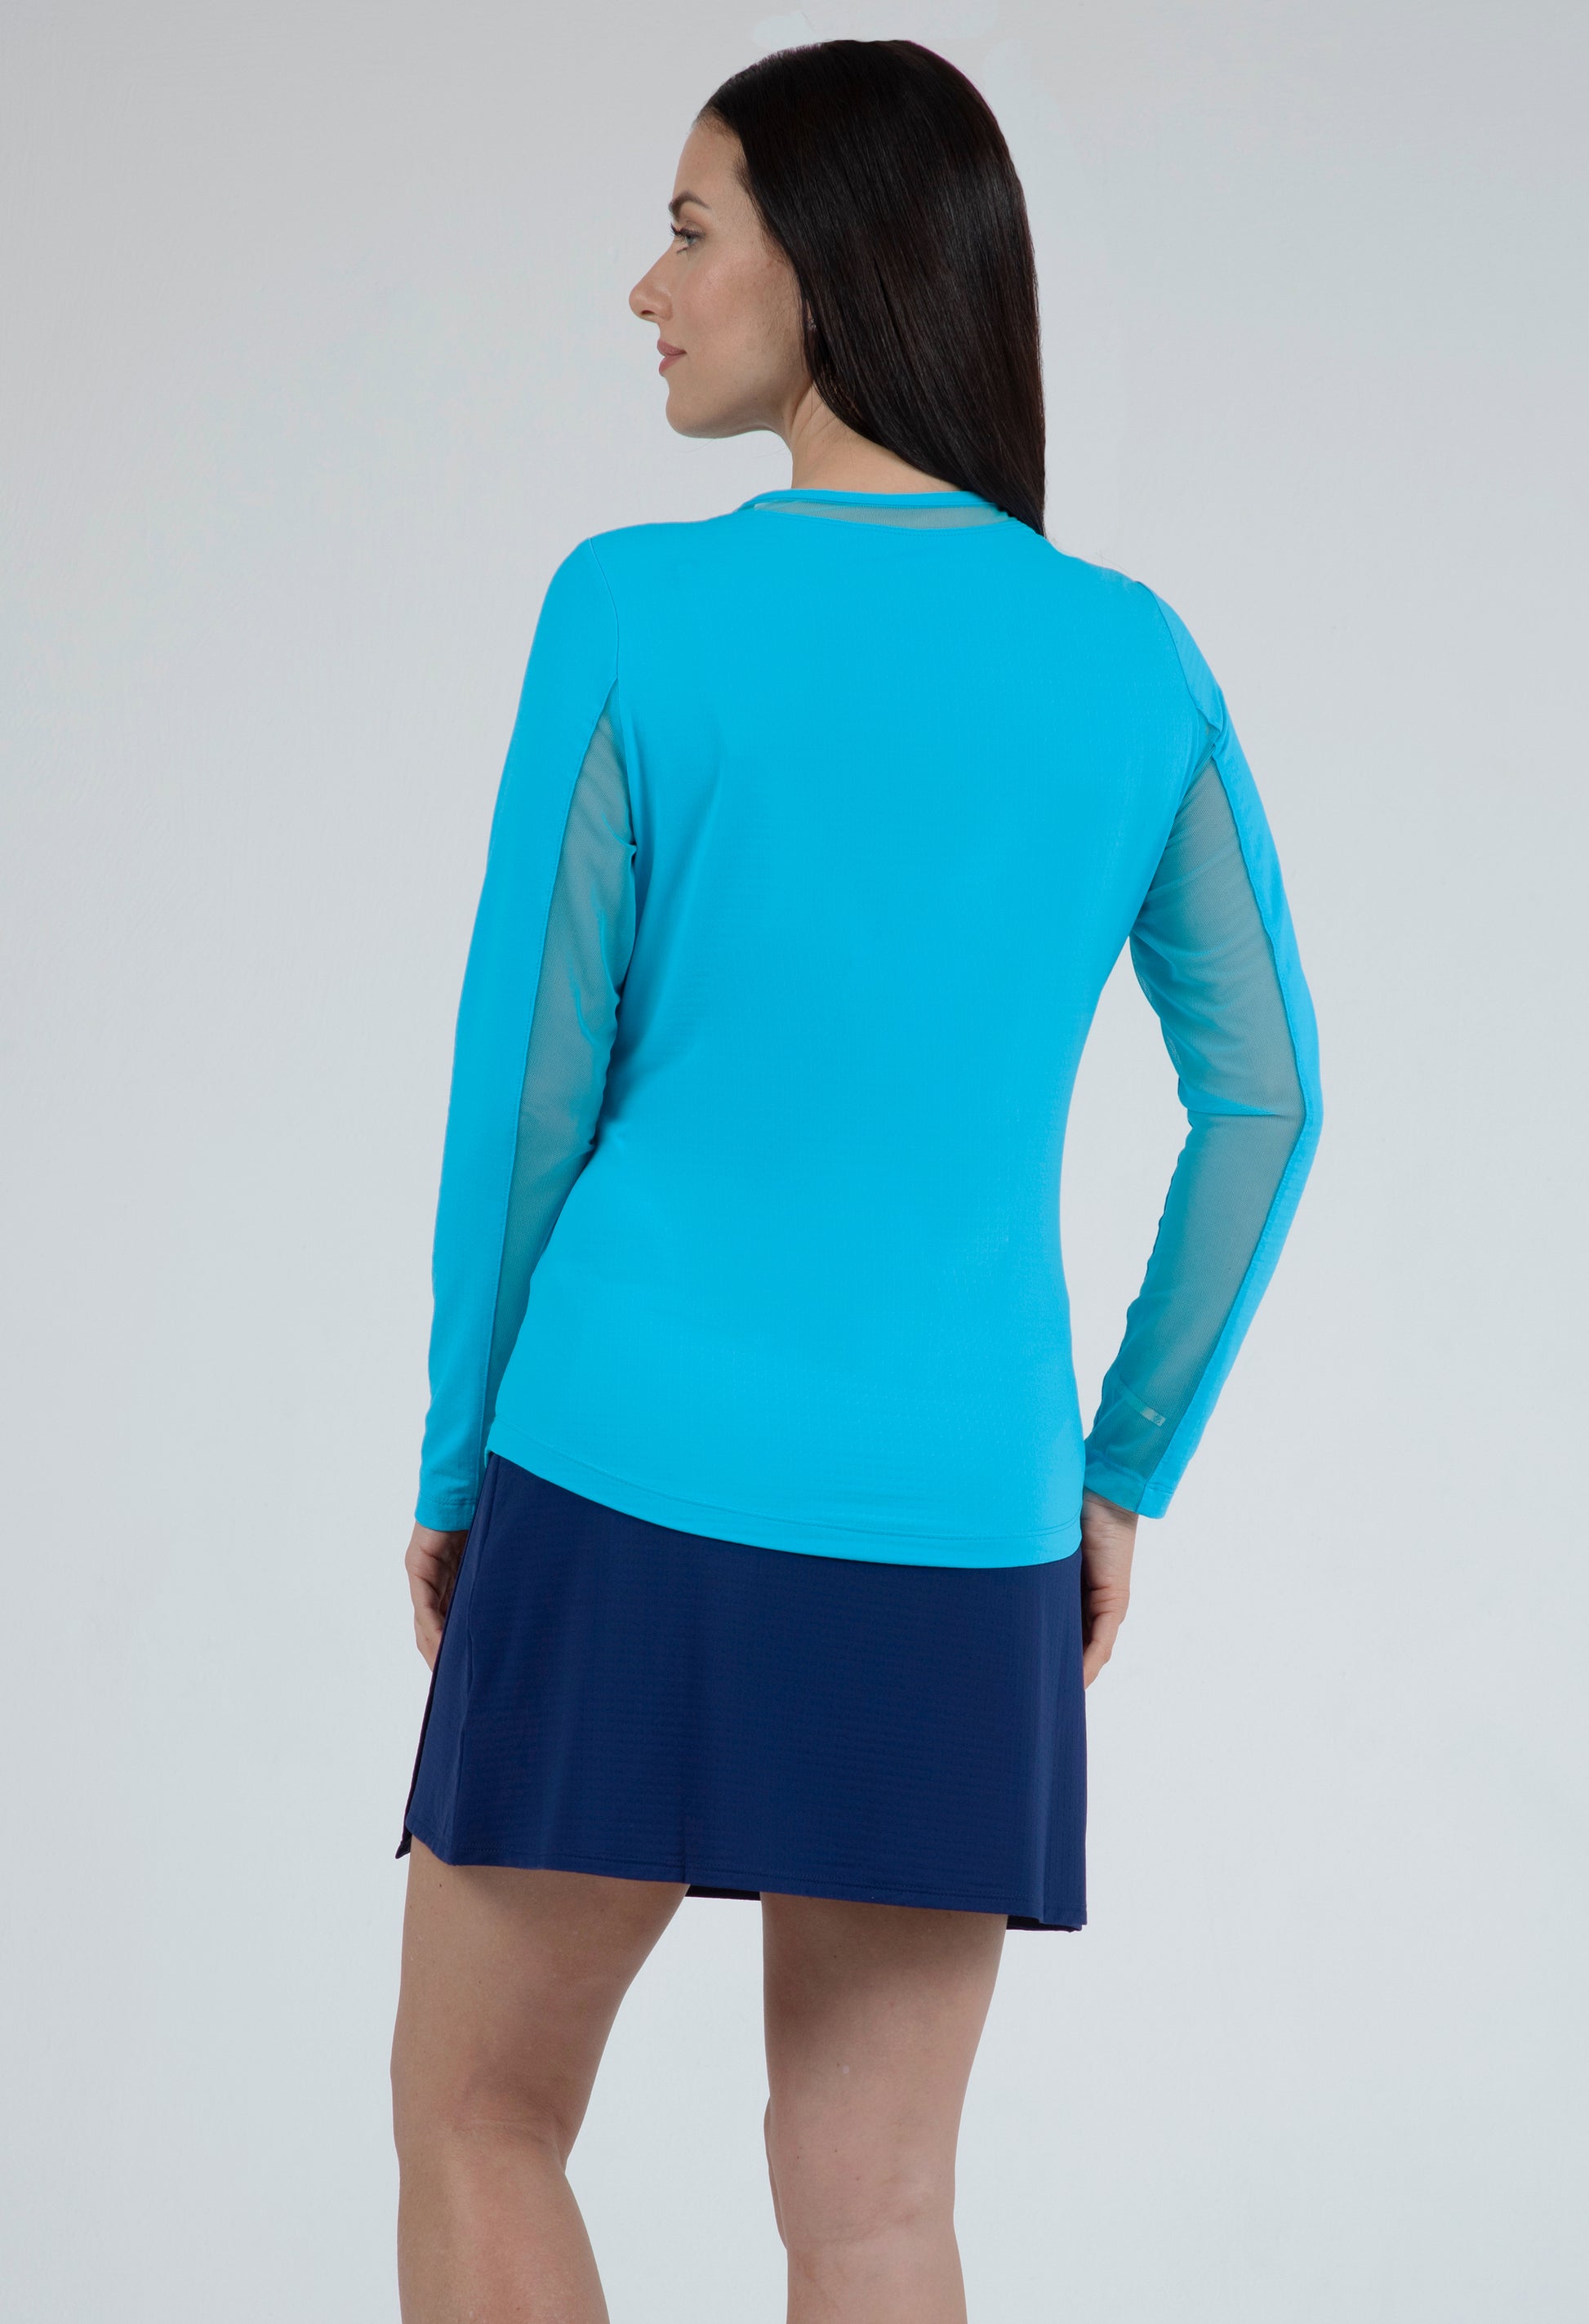 IBKÜL - Long Sleeve Crew Neck with Mesh - 83000 - Color: Turquoise